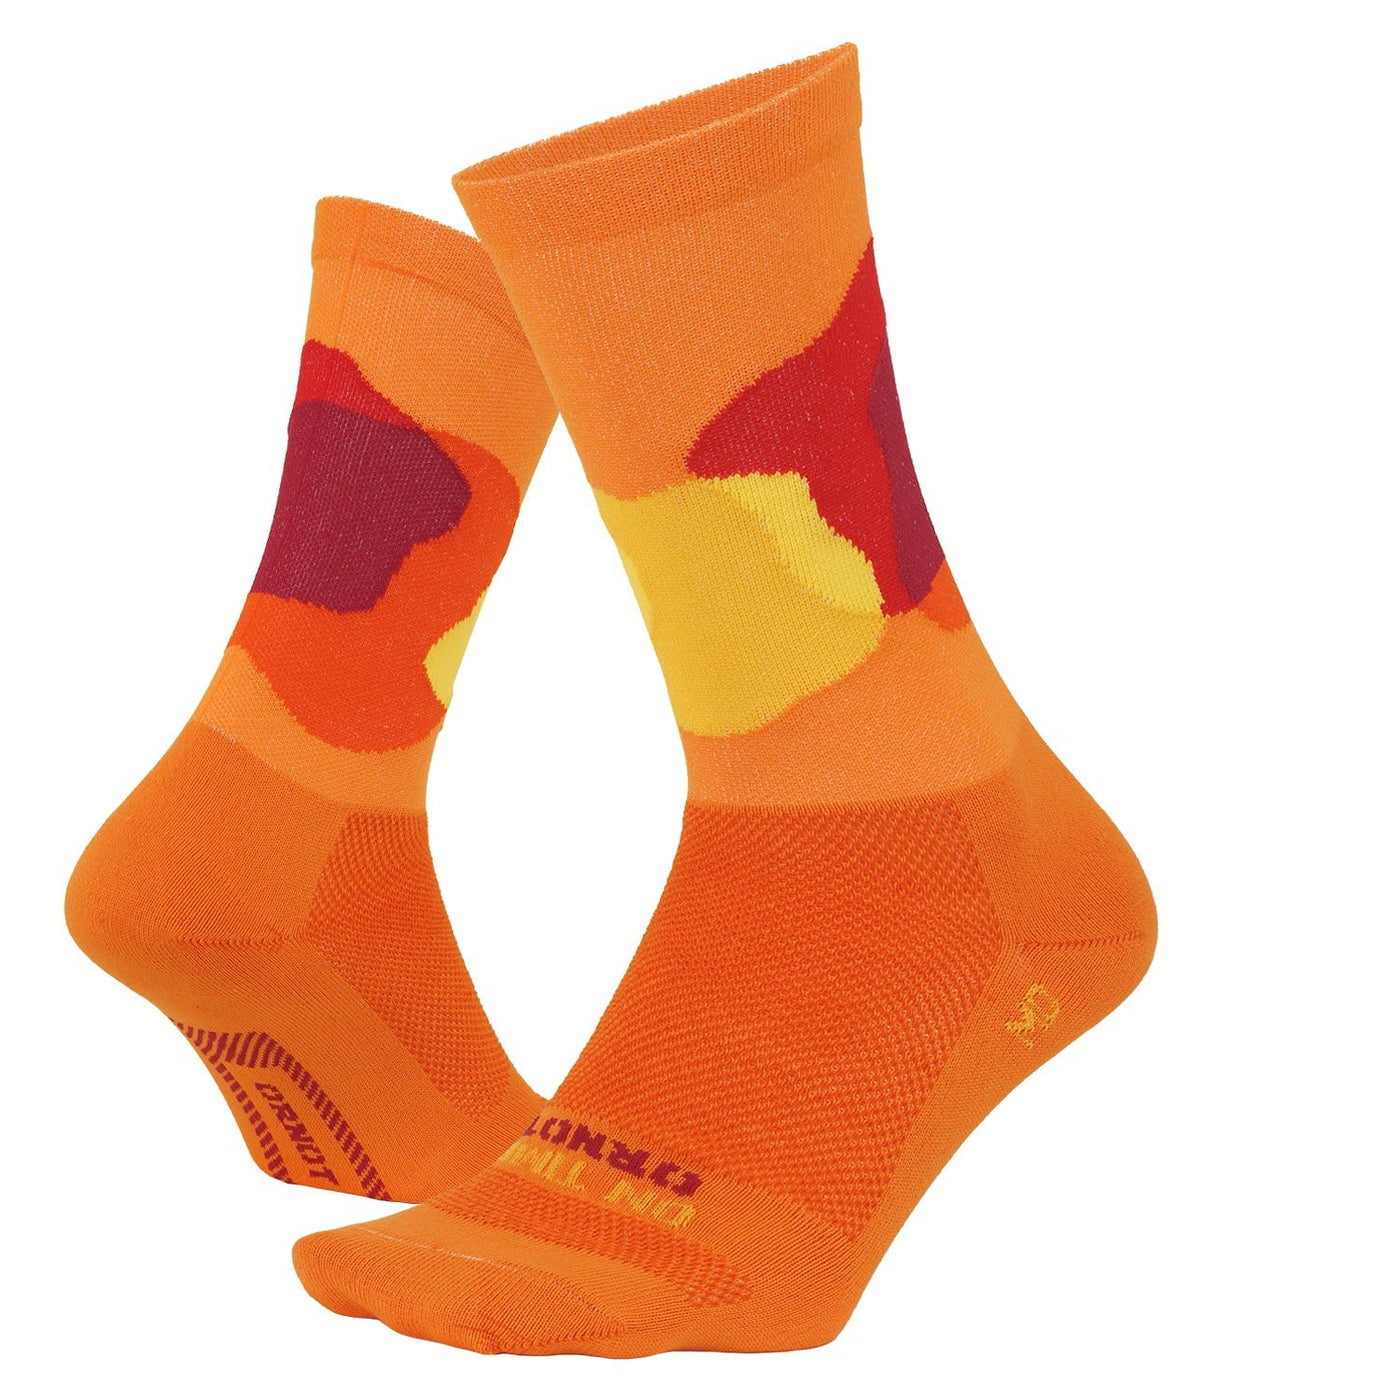 Ornot Aireator 6" Bloom - DeFeet